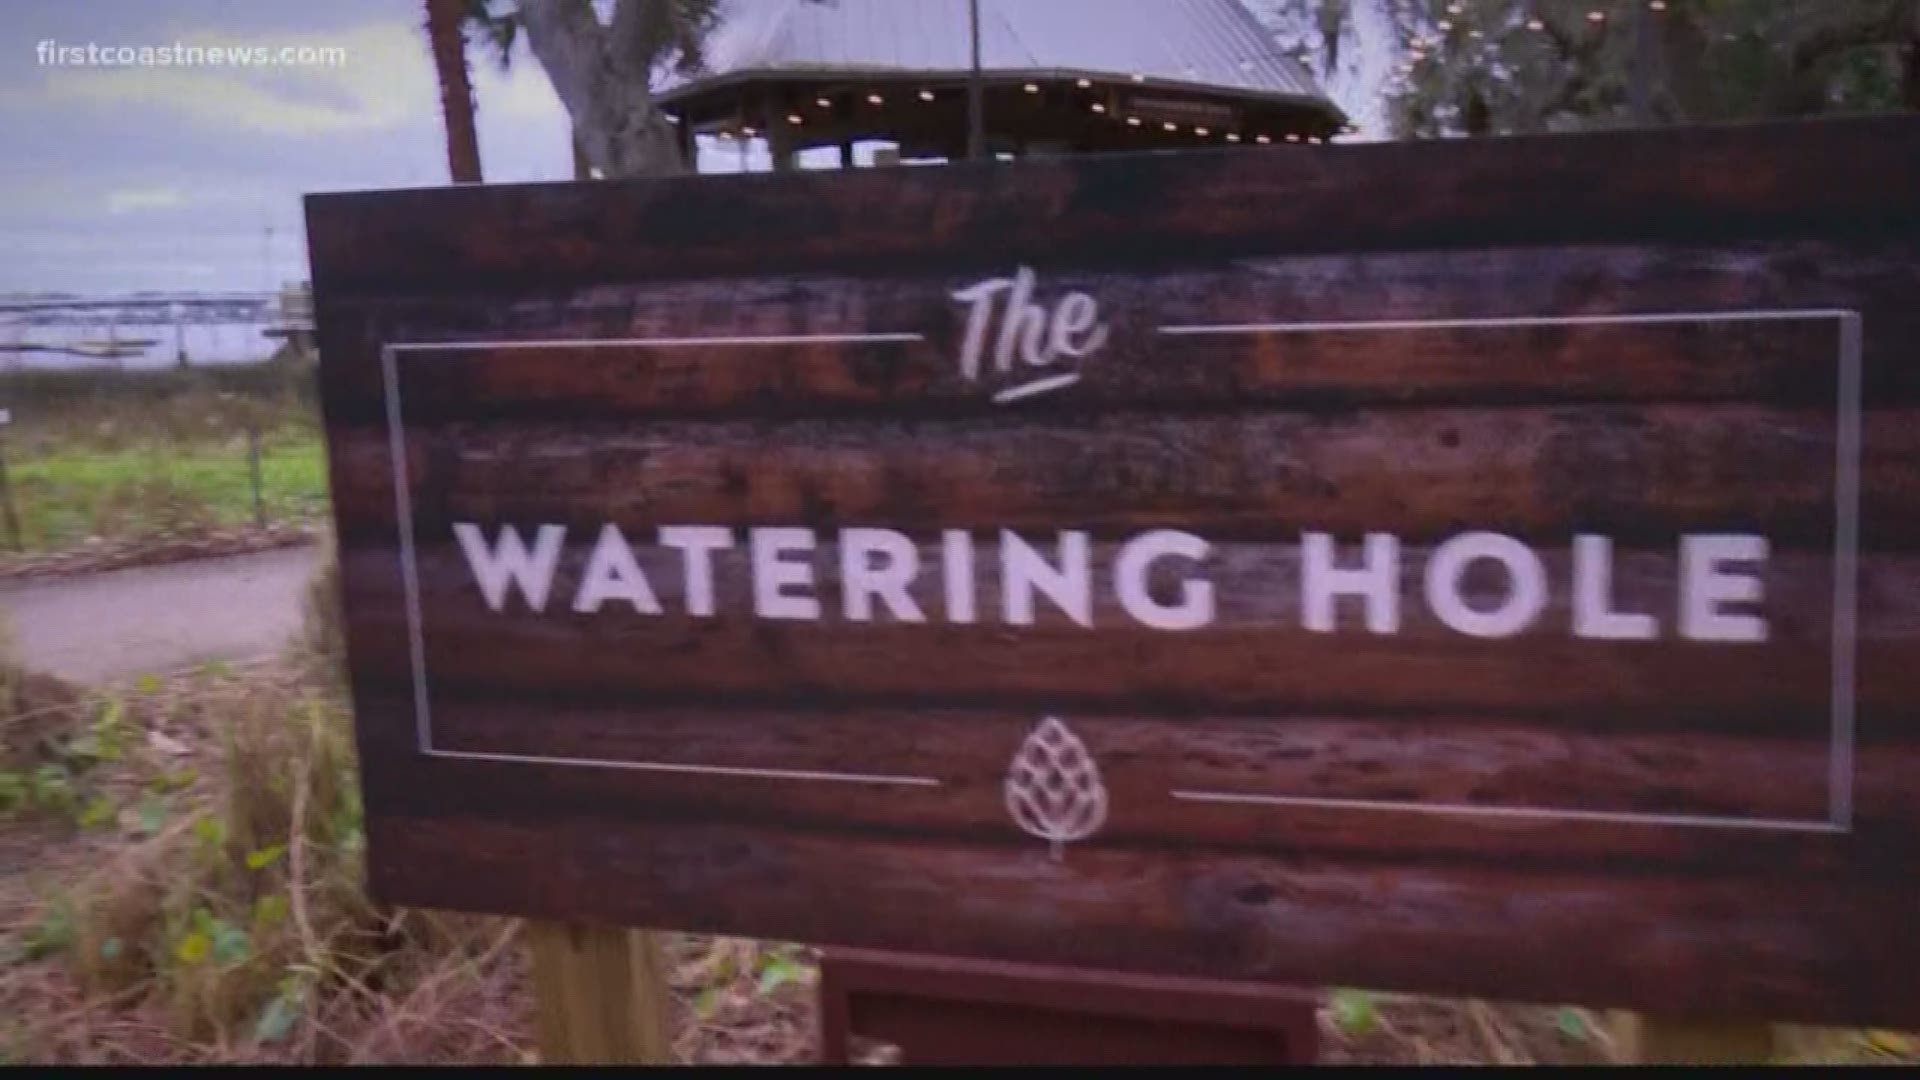 First Coast News gives you your first look at the Jacksonville Zoo's new beer garden called "The Watering Hole."